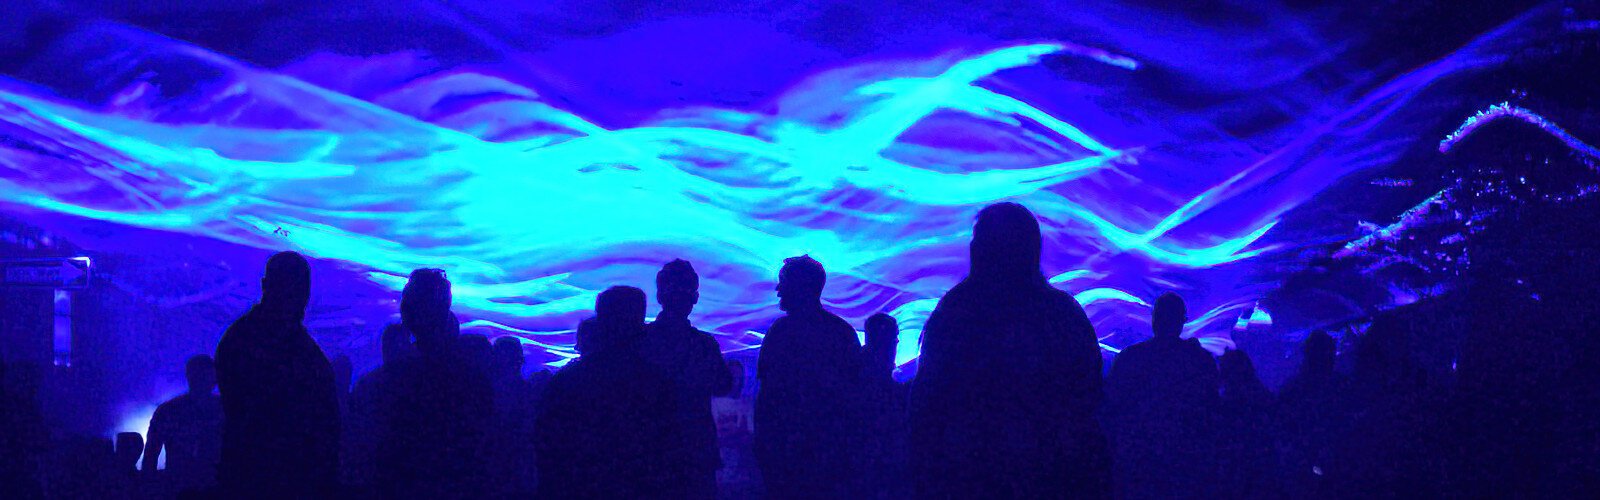 The second annual Arts in Motion installation presented by Water Street Tampa, WATERLICHT transported visitors into a dreamscape environment simulating being underwater.